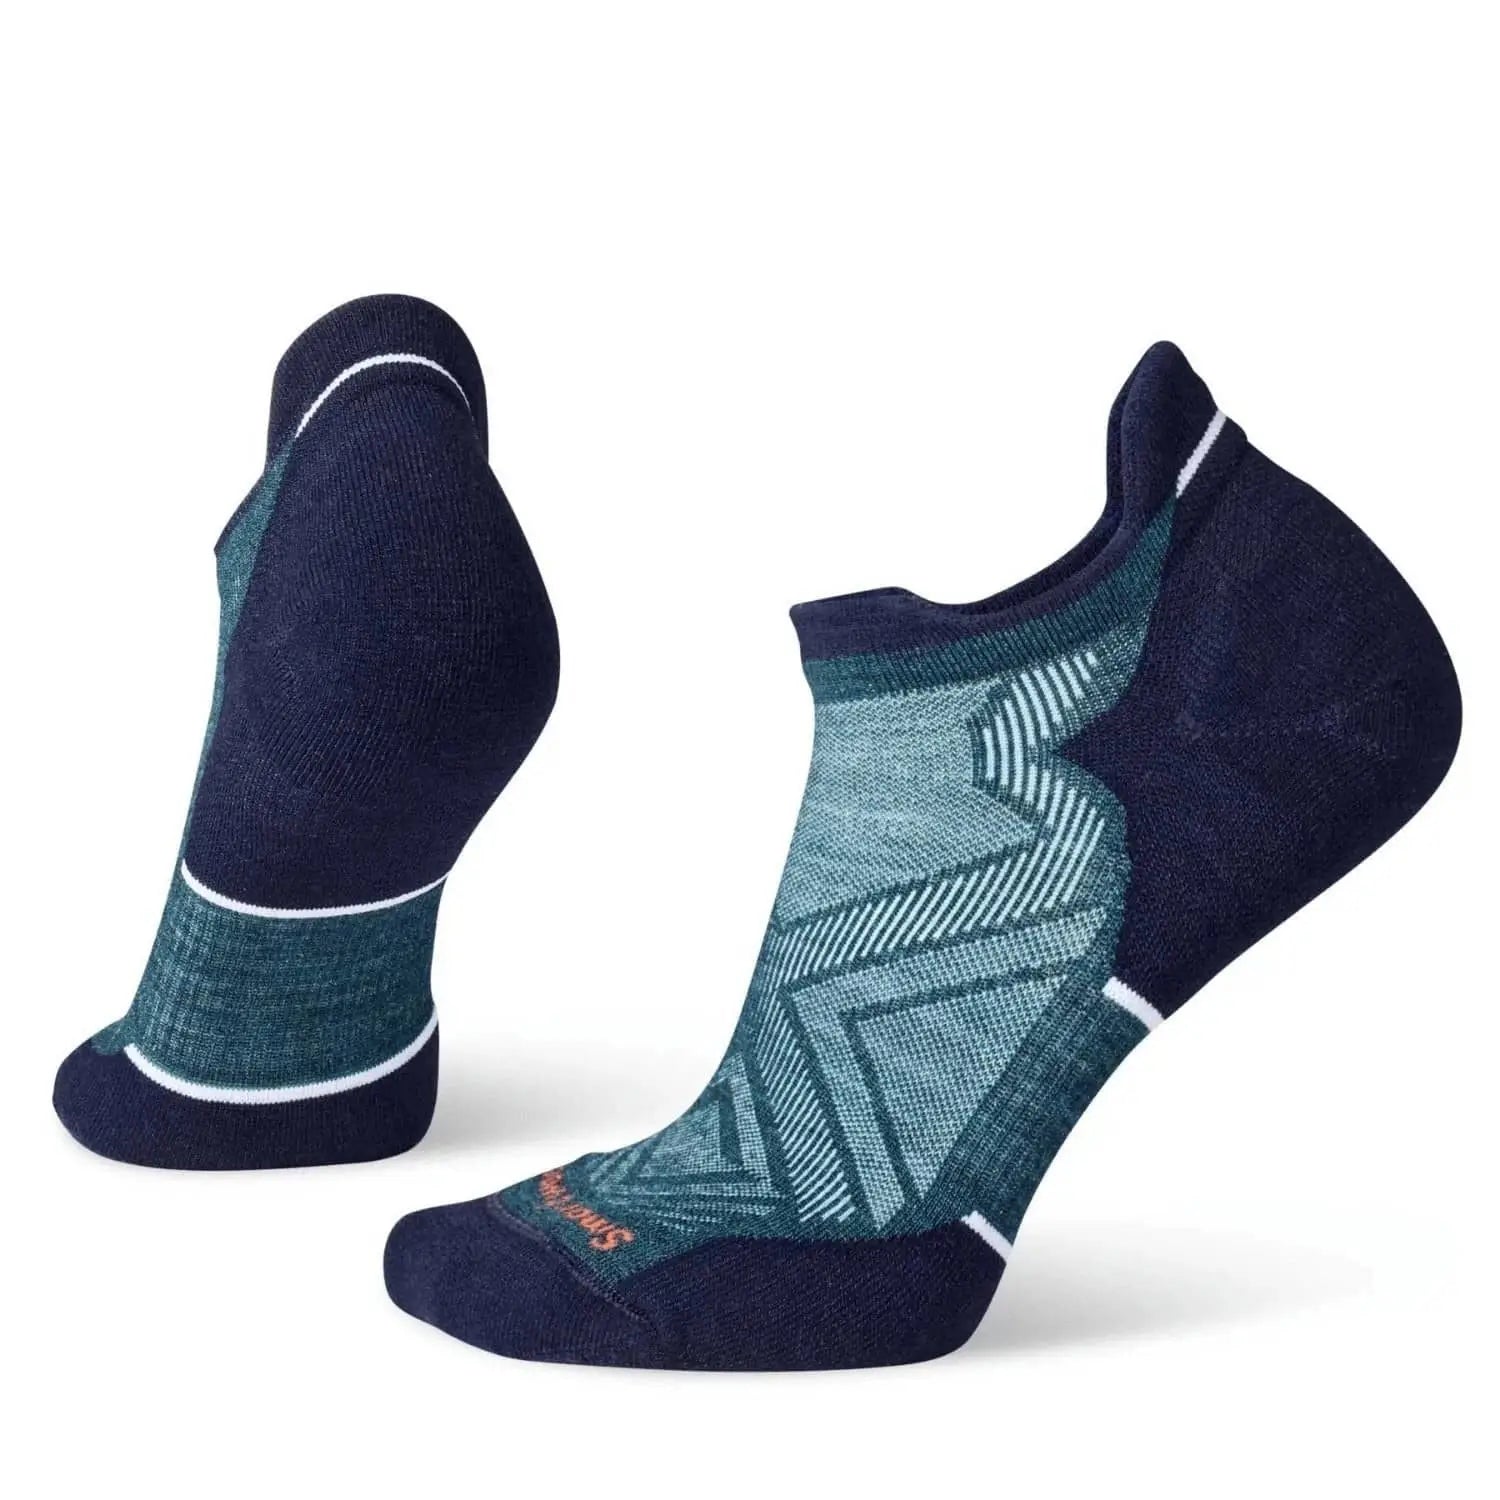 W's Run Targeted Cushion Low Ankle Socks